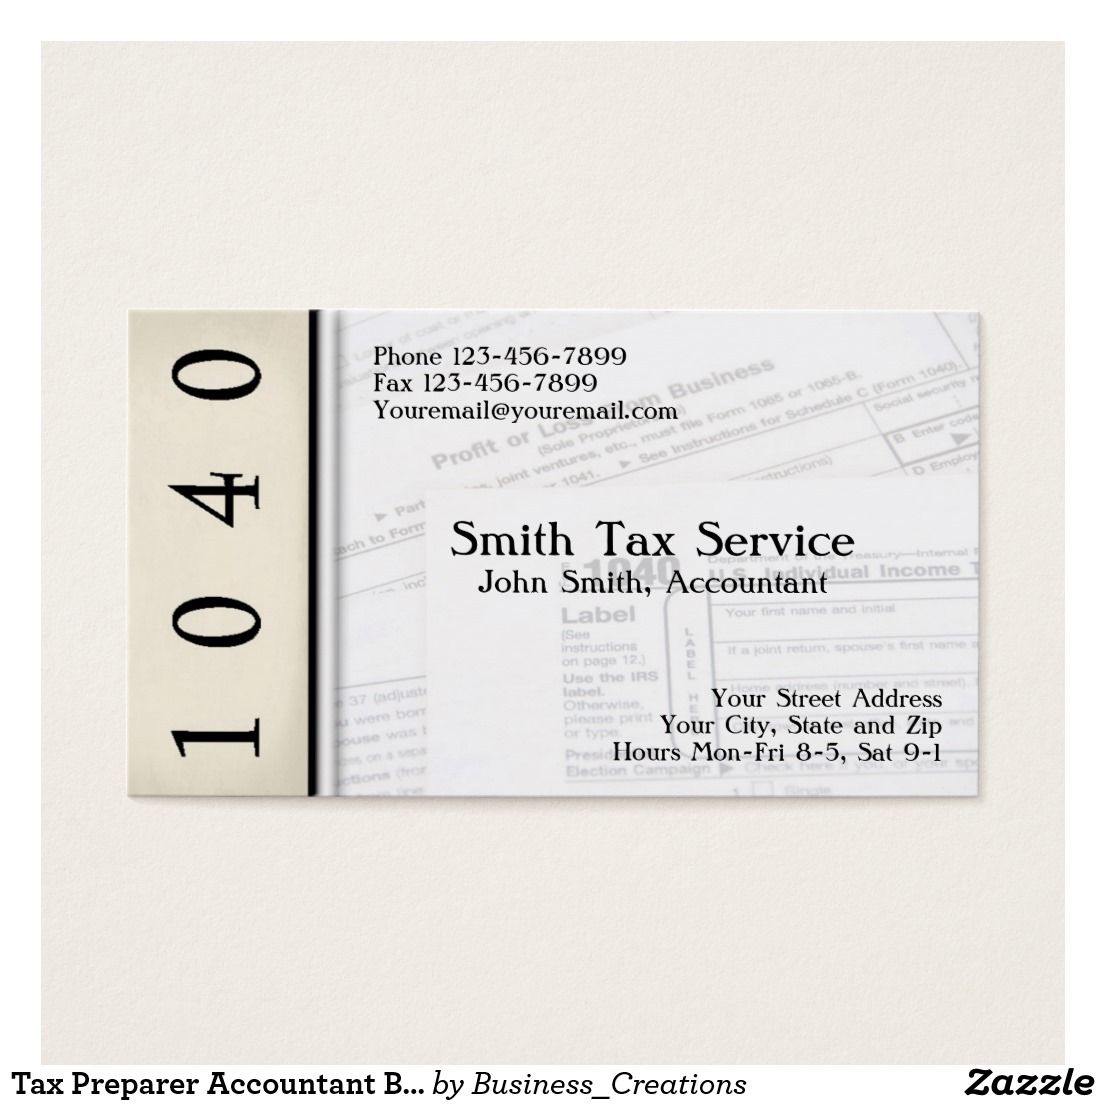 tax preparer business cards example 8